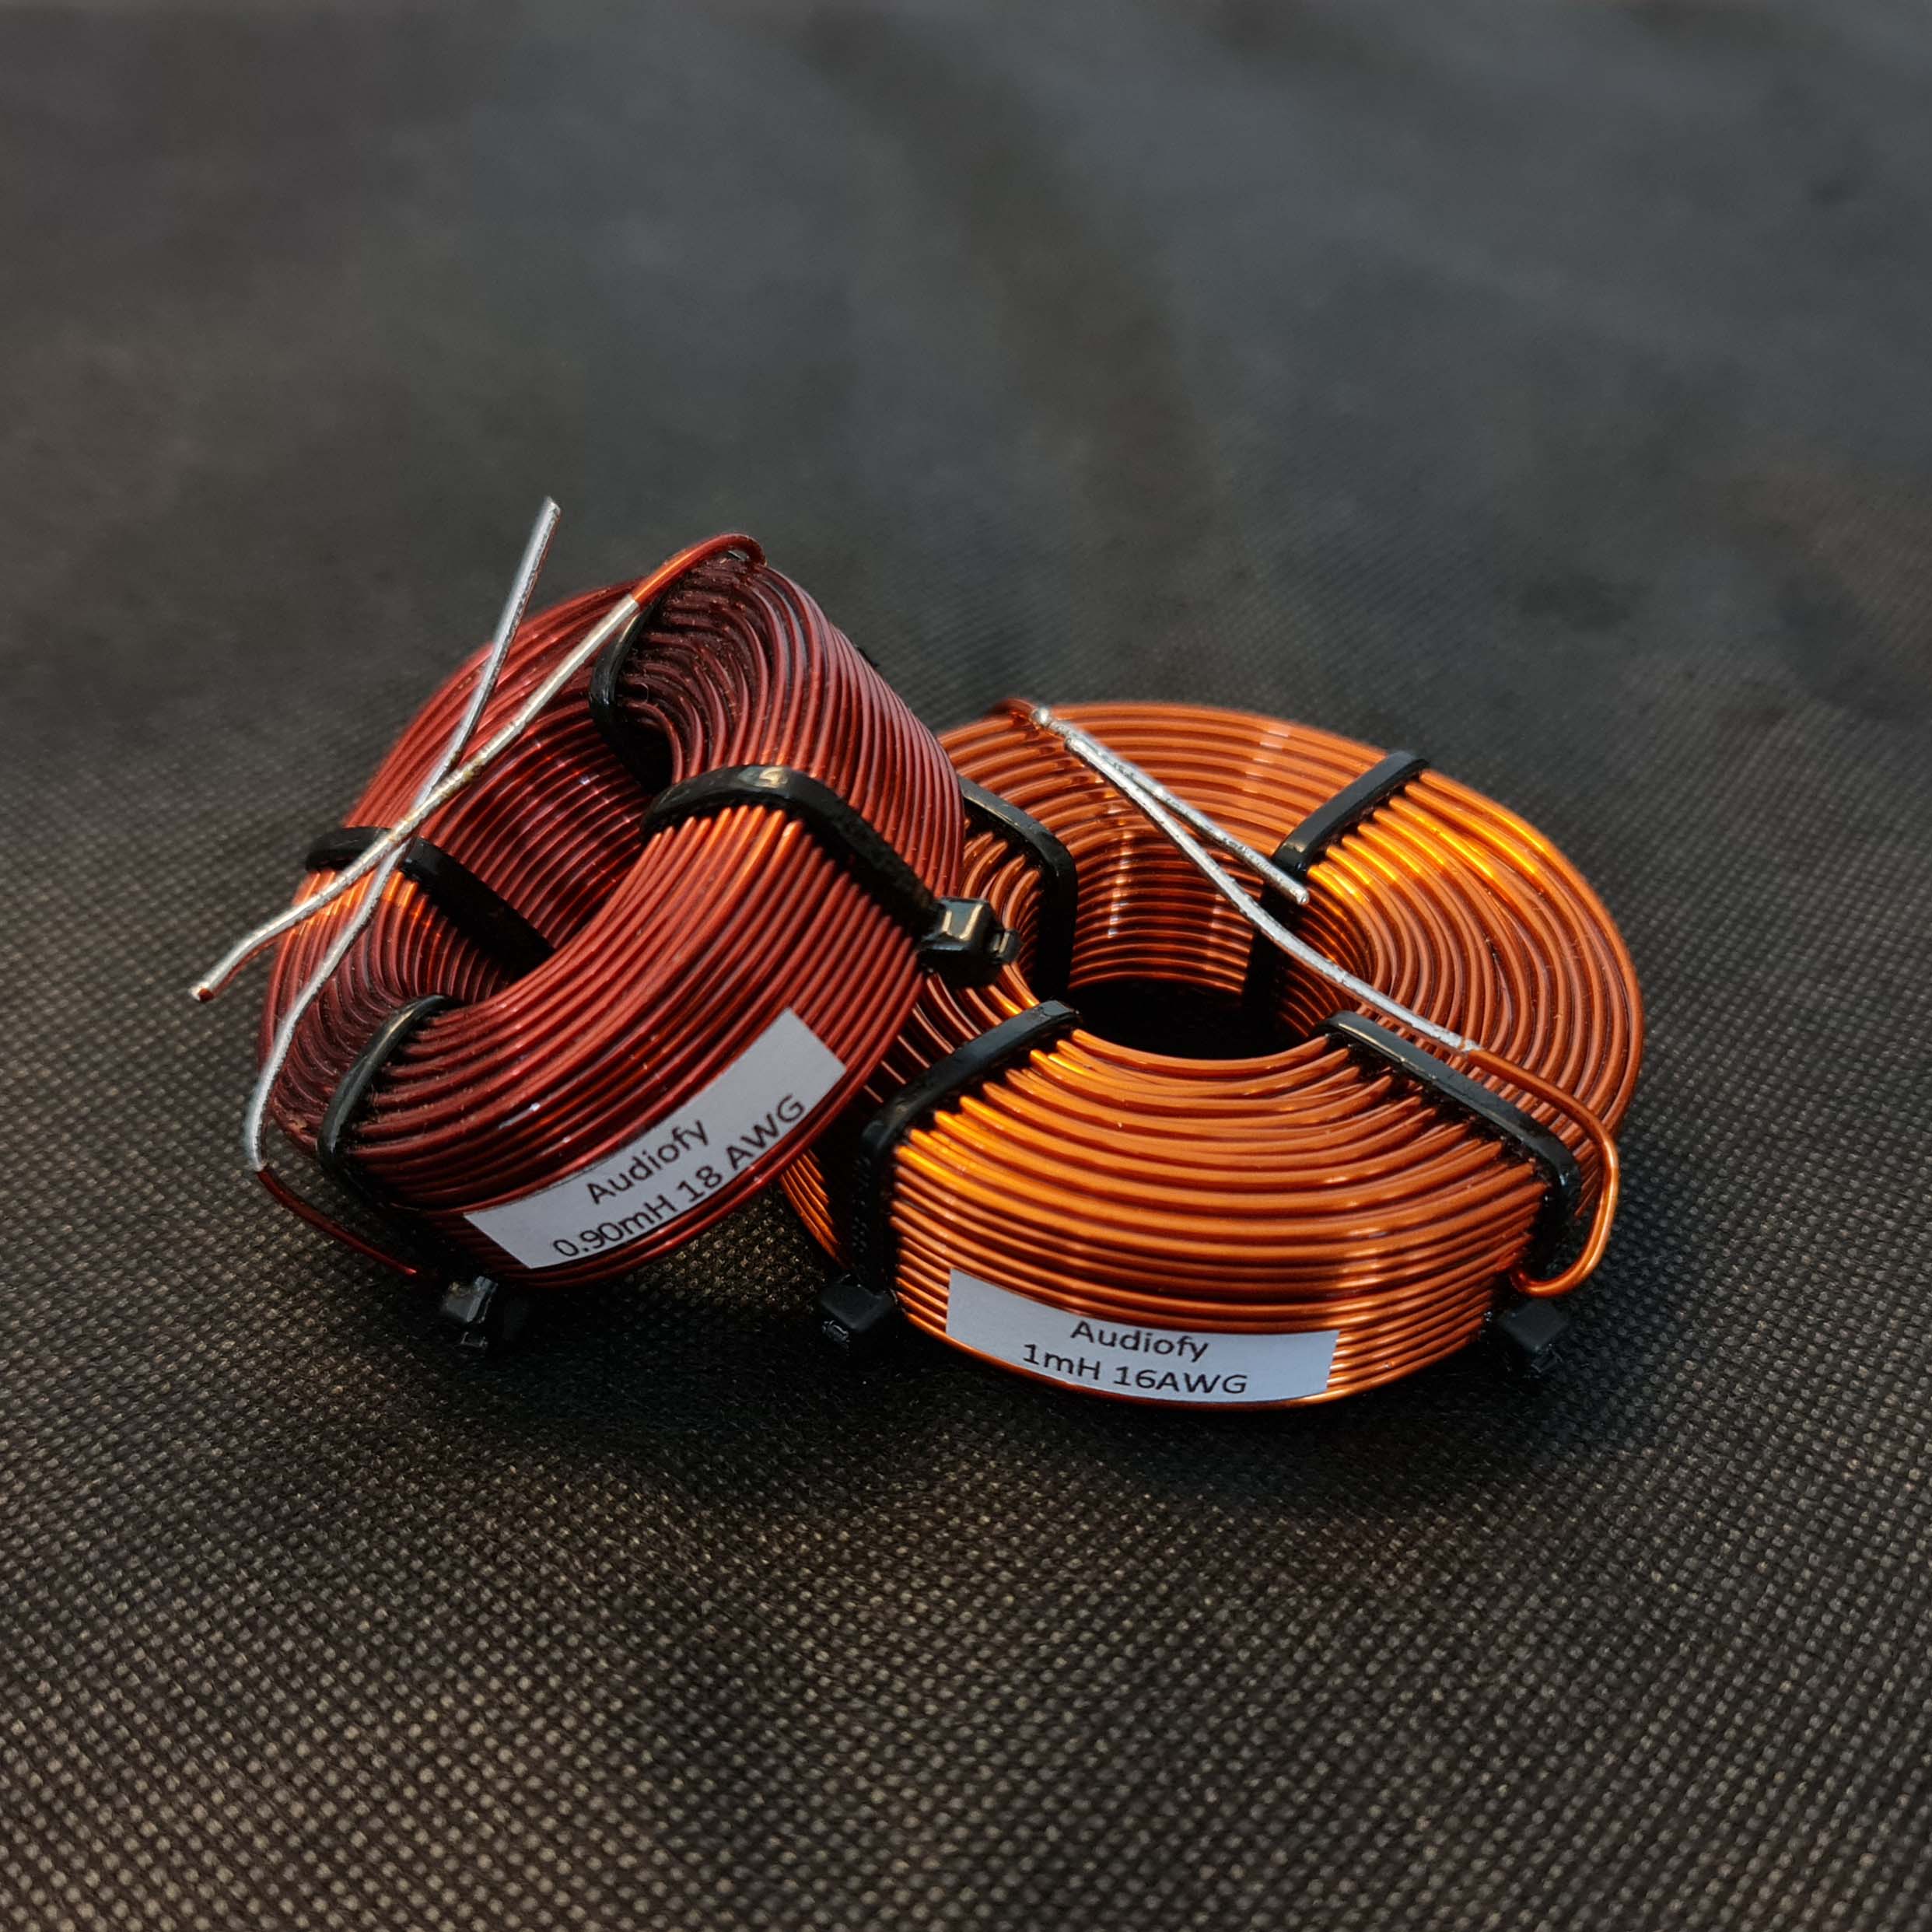 Audiofy 0.90mH 16 AWG Air Core Crossover Inductor